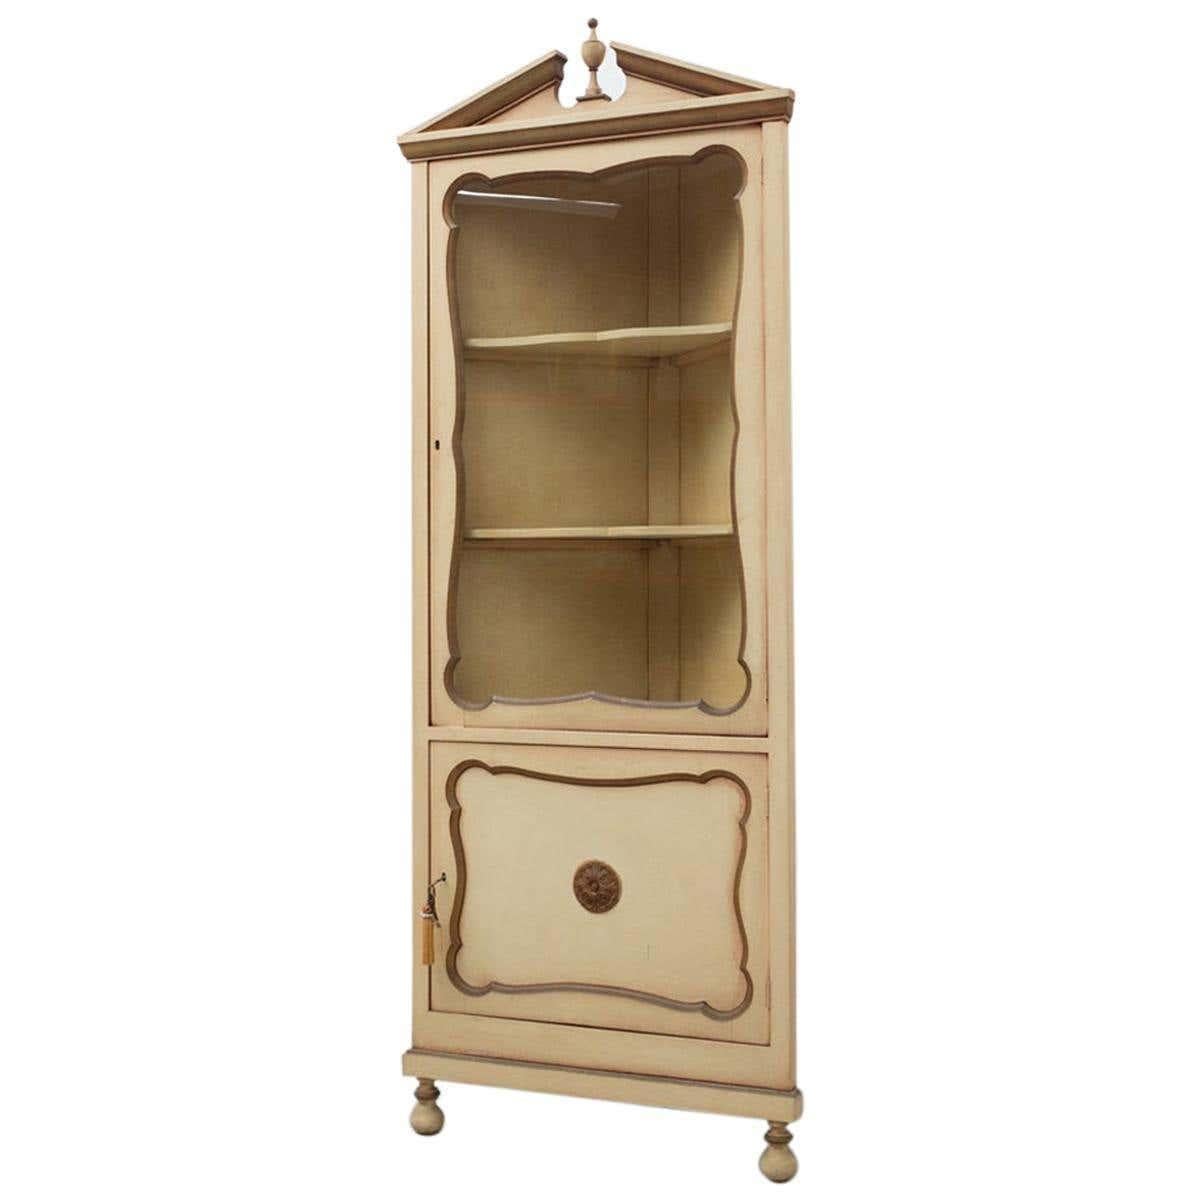 20th century French Provincial style corner display cabinet.
By unknown manufacturer from France. 

Painted in cream, with ancient gold painted details and dark green back.
Curved forms and characteristic details of French Provincial